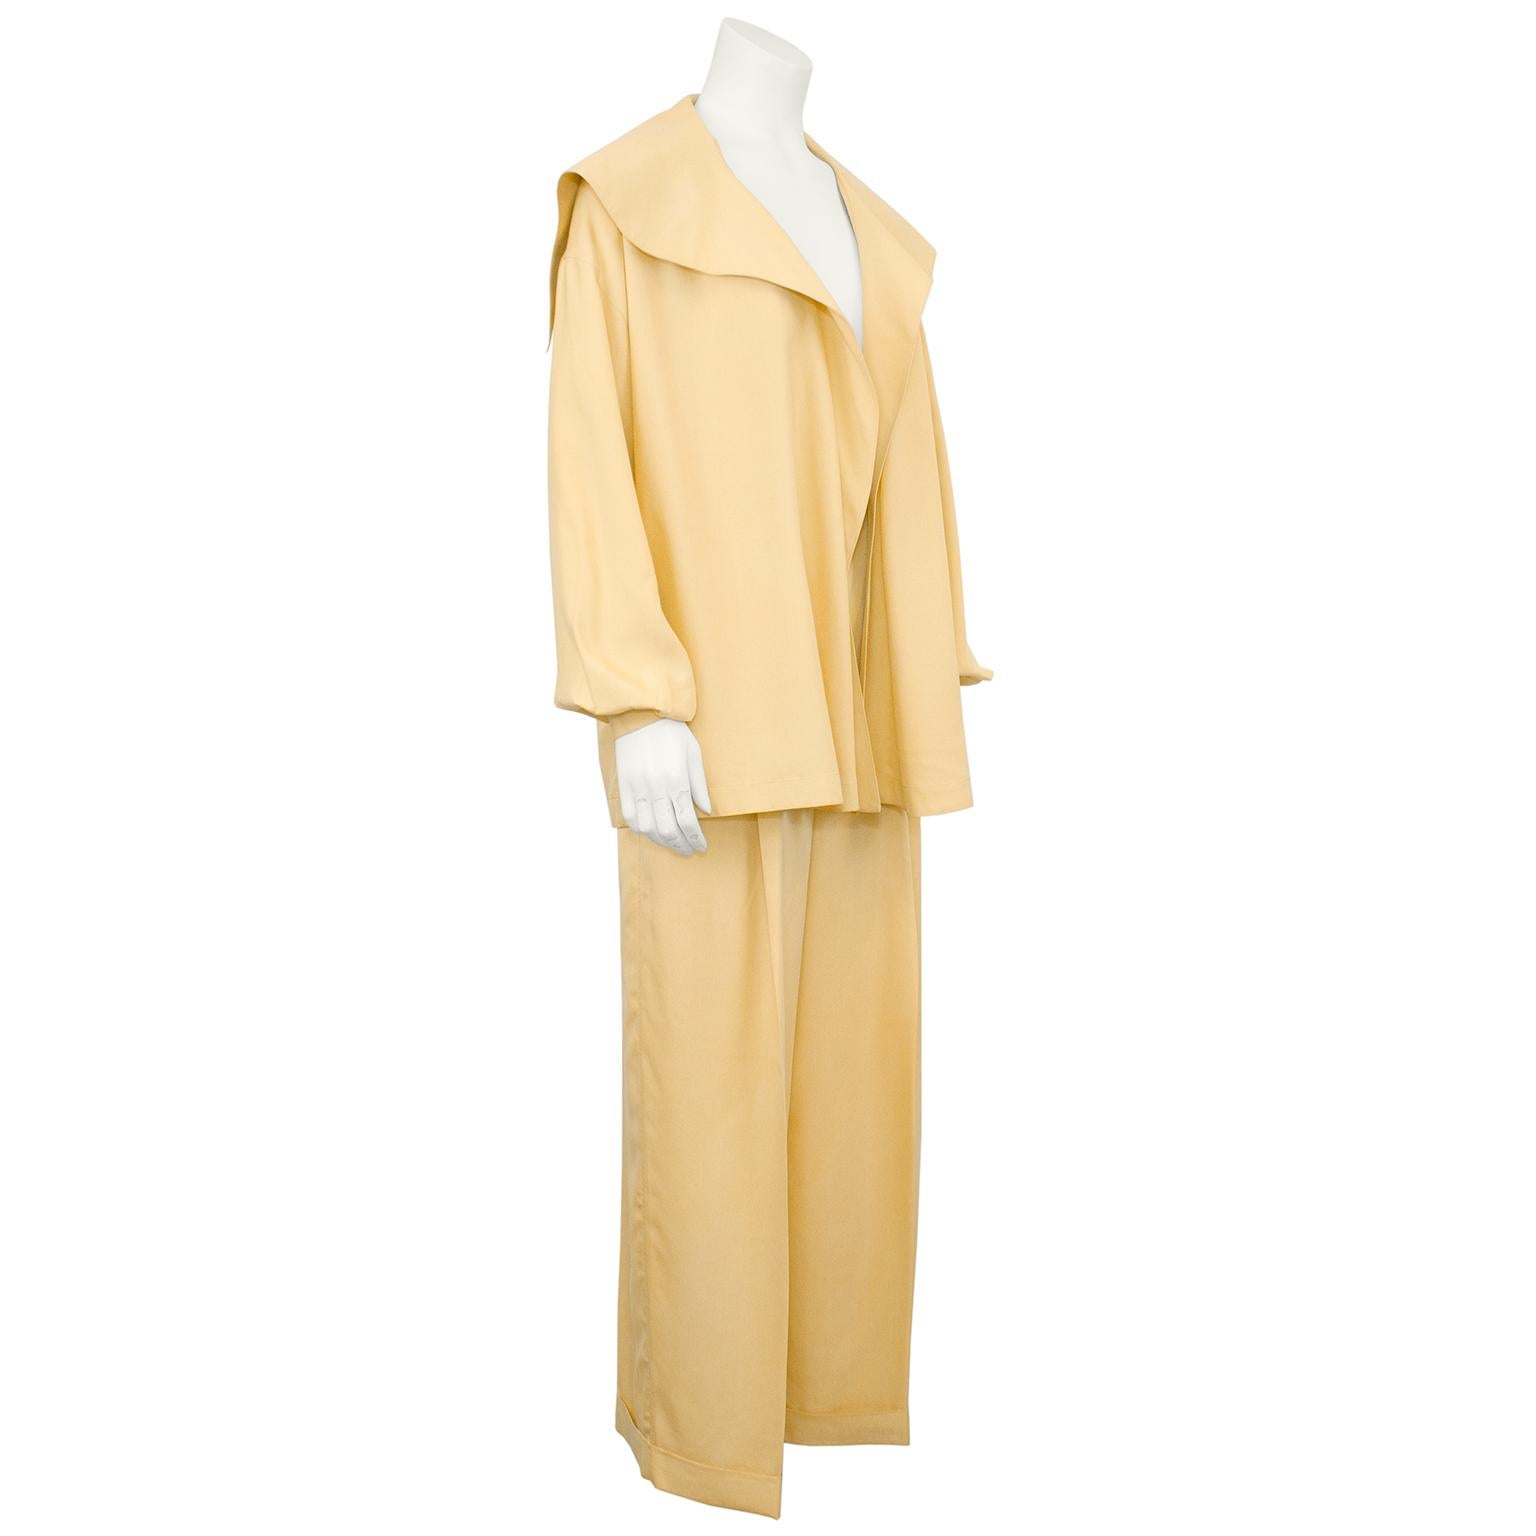 Amazing Claude Montana lightweight silk jacket and trouser ensemble from the 1980s. The jacket is open and loose through the body with an oversized collar that comes to a sharp point and hangs over the shoulders. Bishop sleeves. Pants are